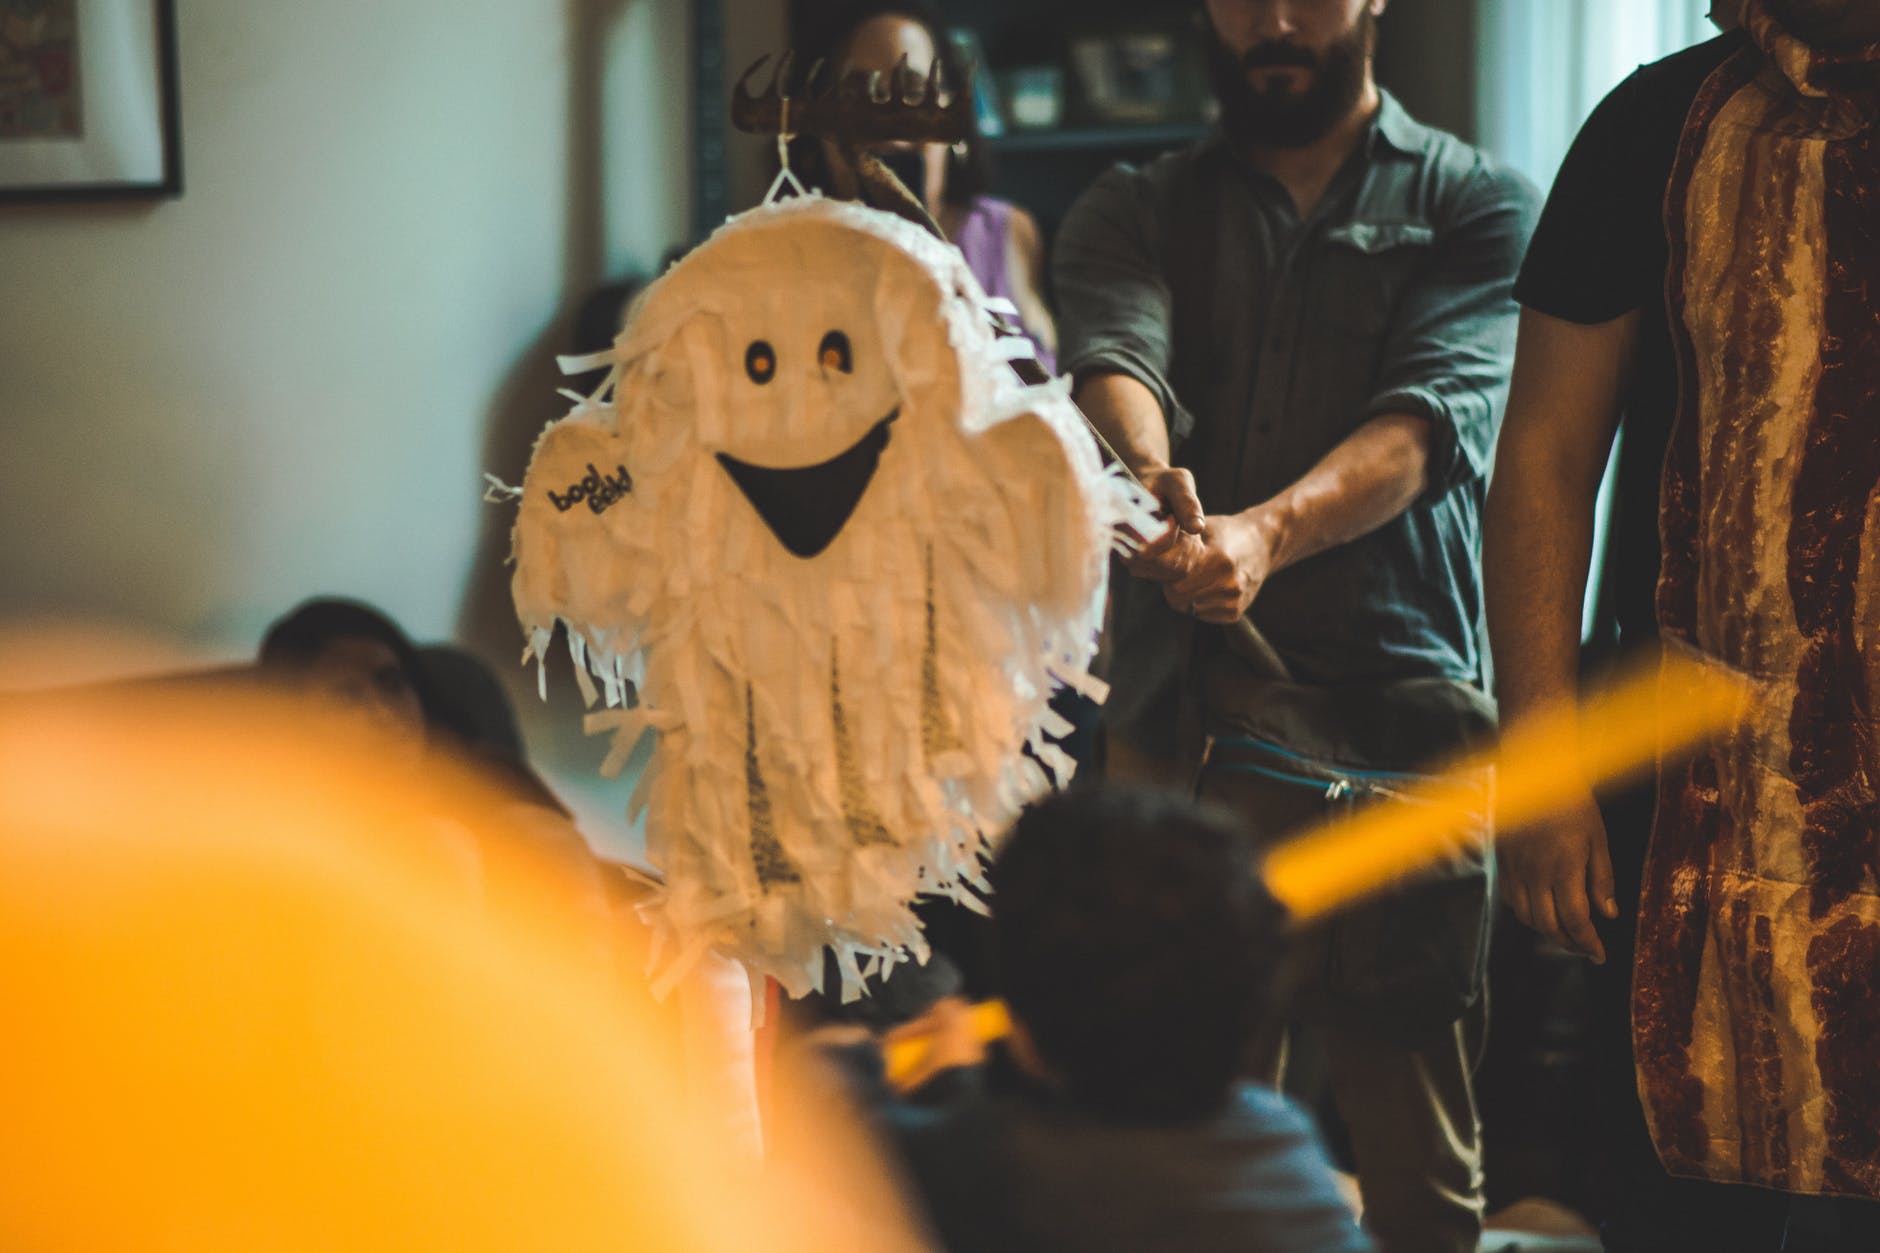 Ghost Piñata at a halloween party